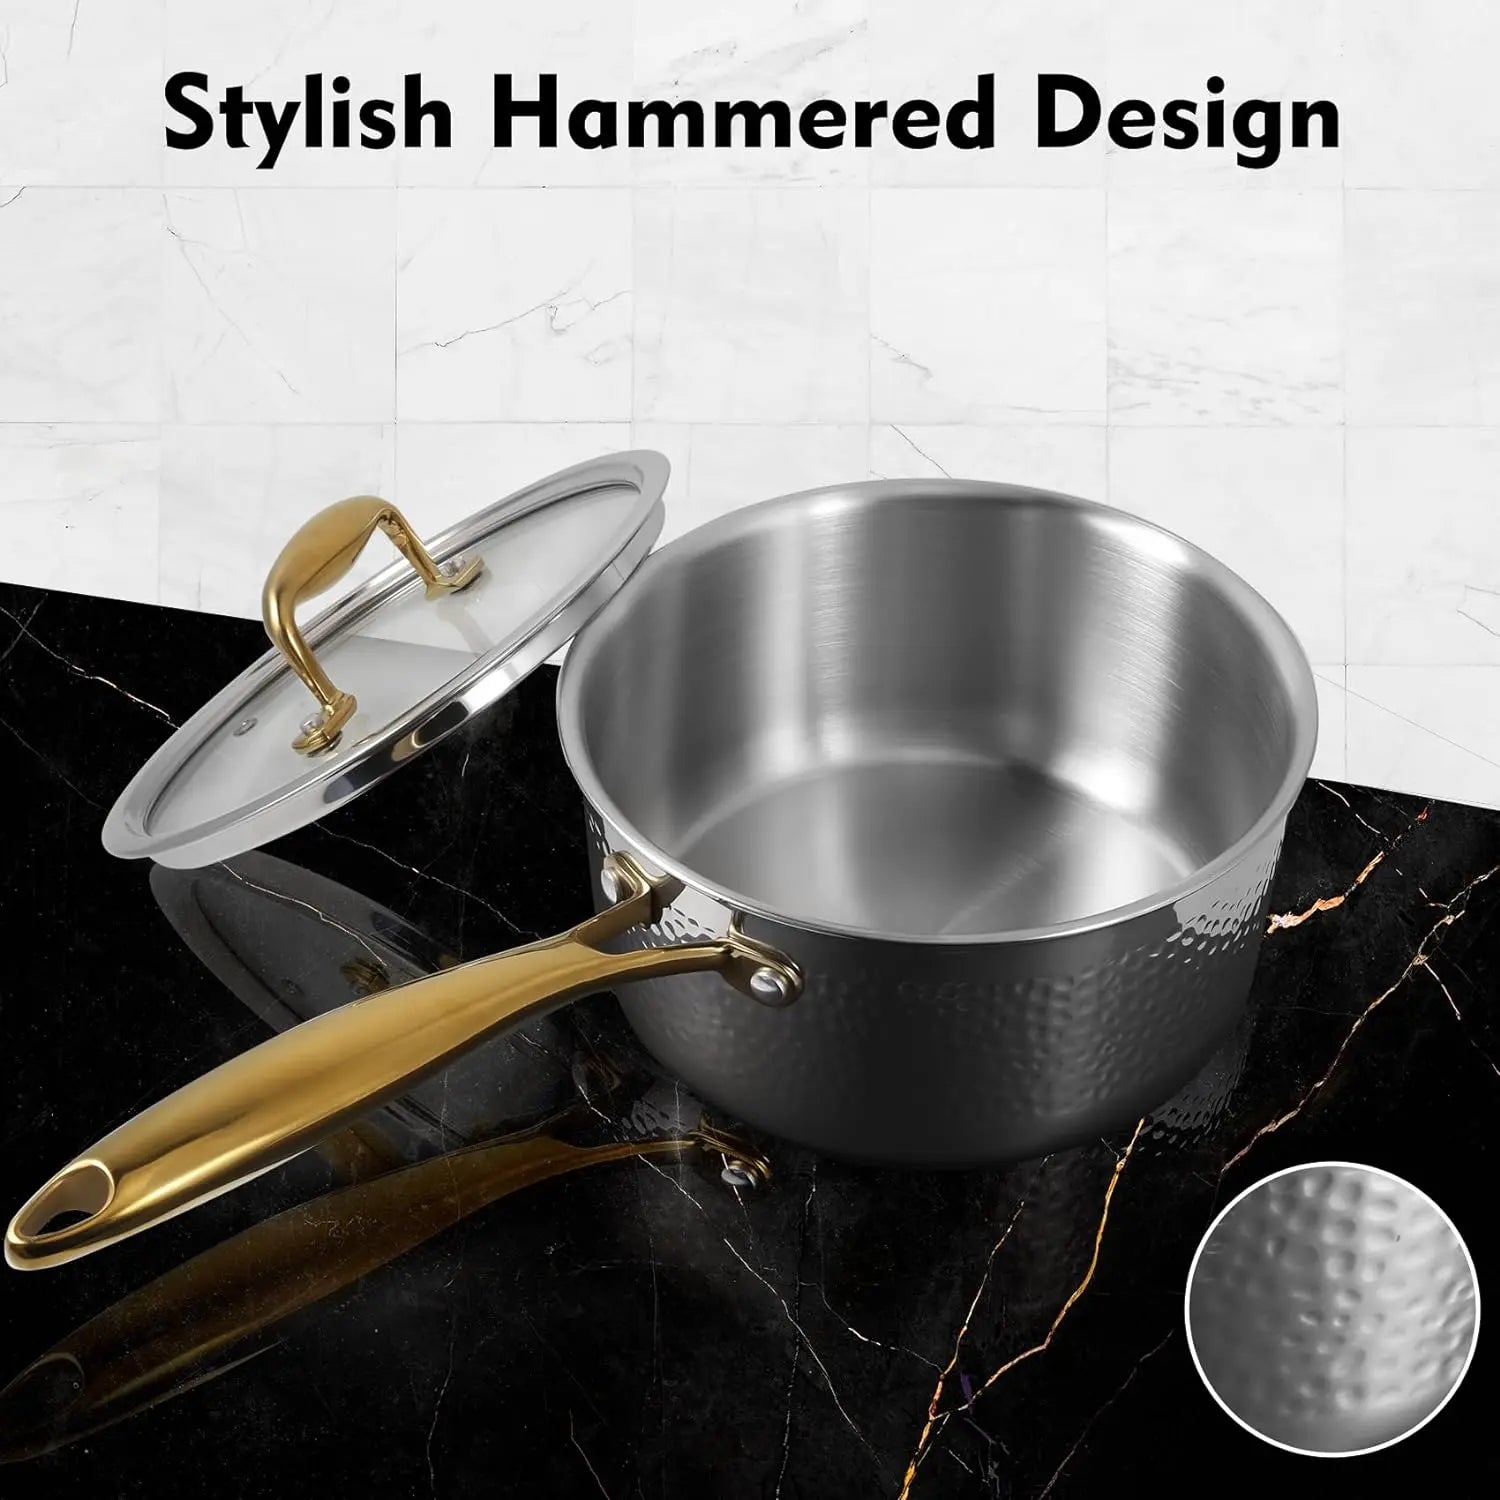 Stunning Hammered Design Stainless Steel Pots and Pans Cookware Set - IMARKU